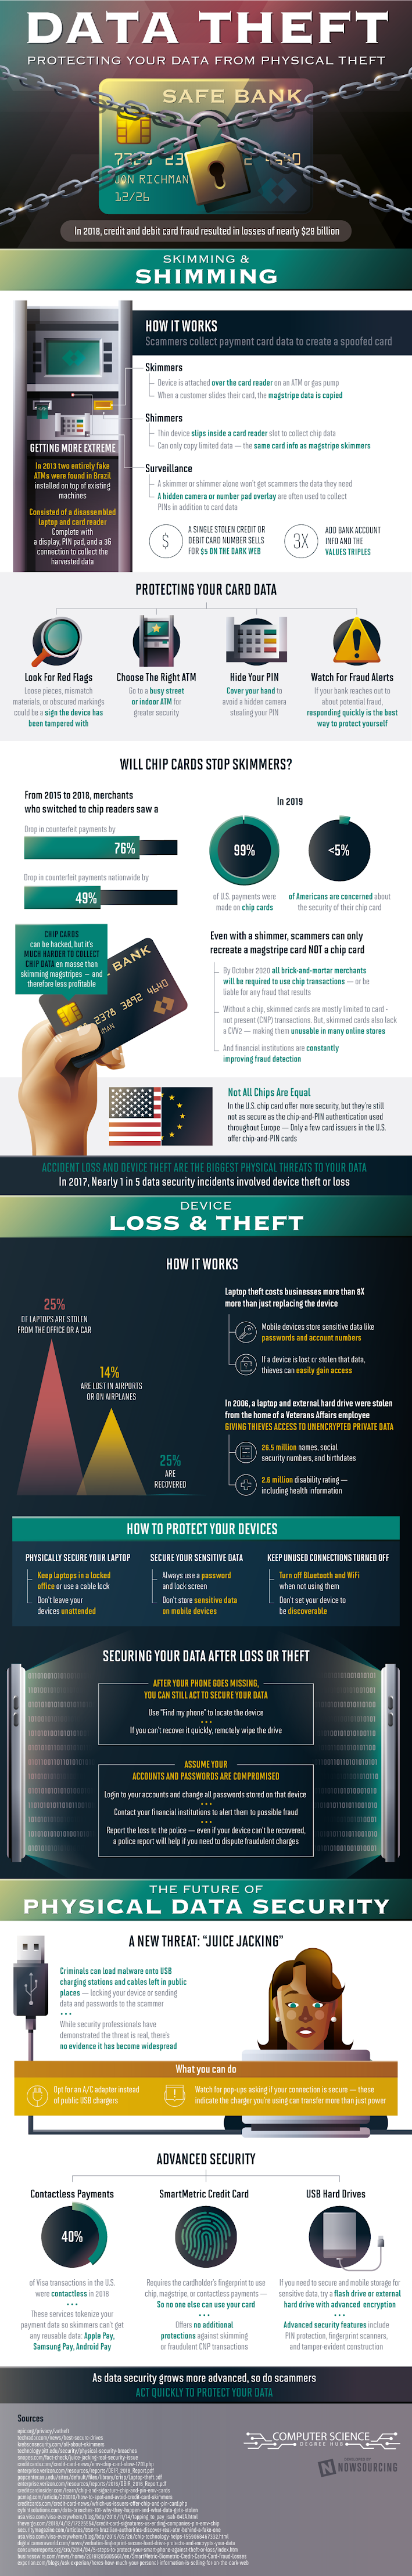 Data Theft: Protecting Your Data From Physical Theft #infographic